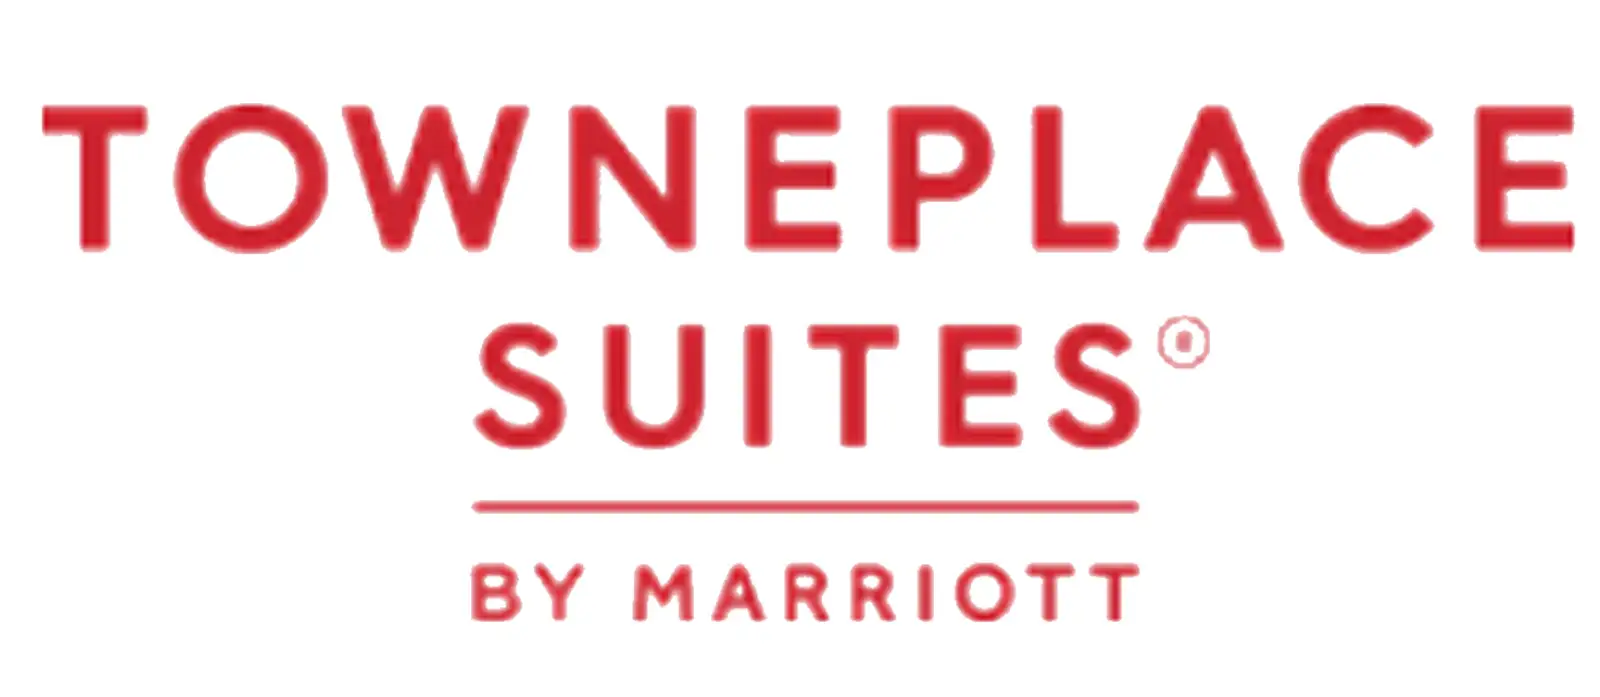 TownePlace Suites logo